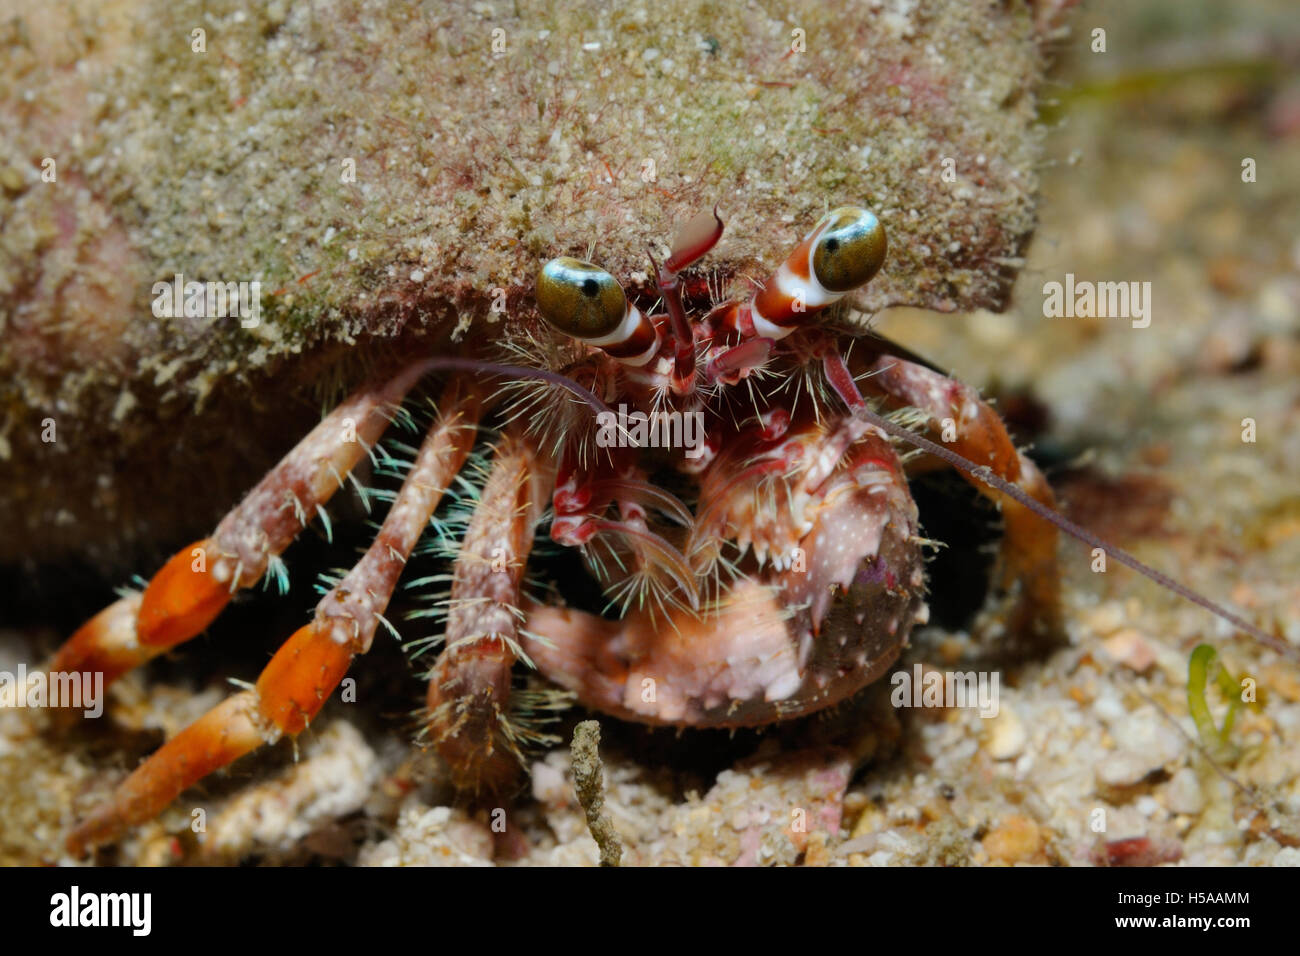 Anemone hermit crab laden with a big shell covered with small bits of debris for camouflage, Puerto Galera, Philippines Stock Photo